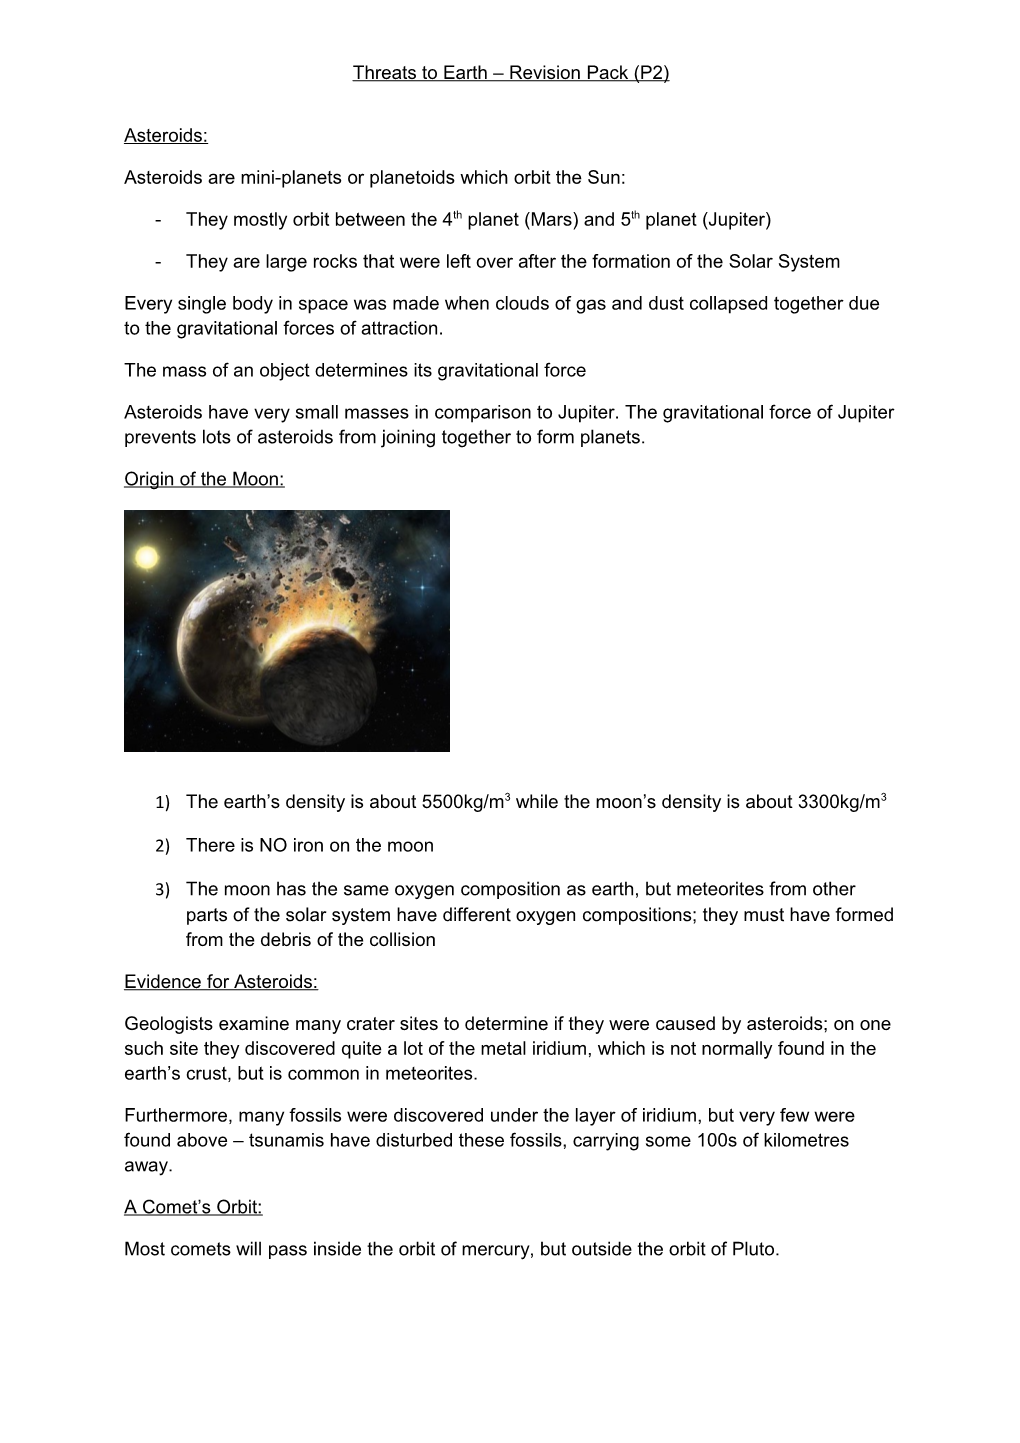 Threats to Earth Revision Pack (P2)